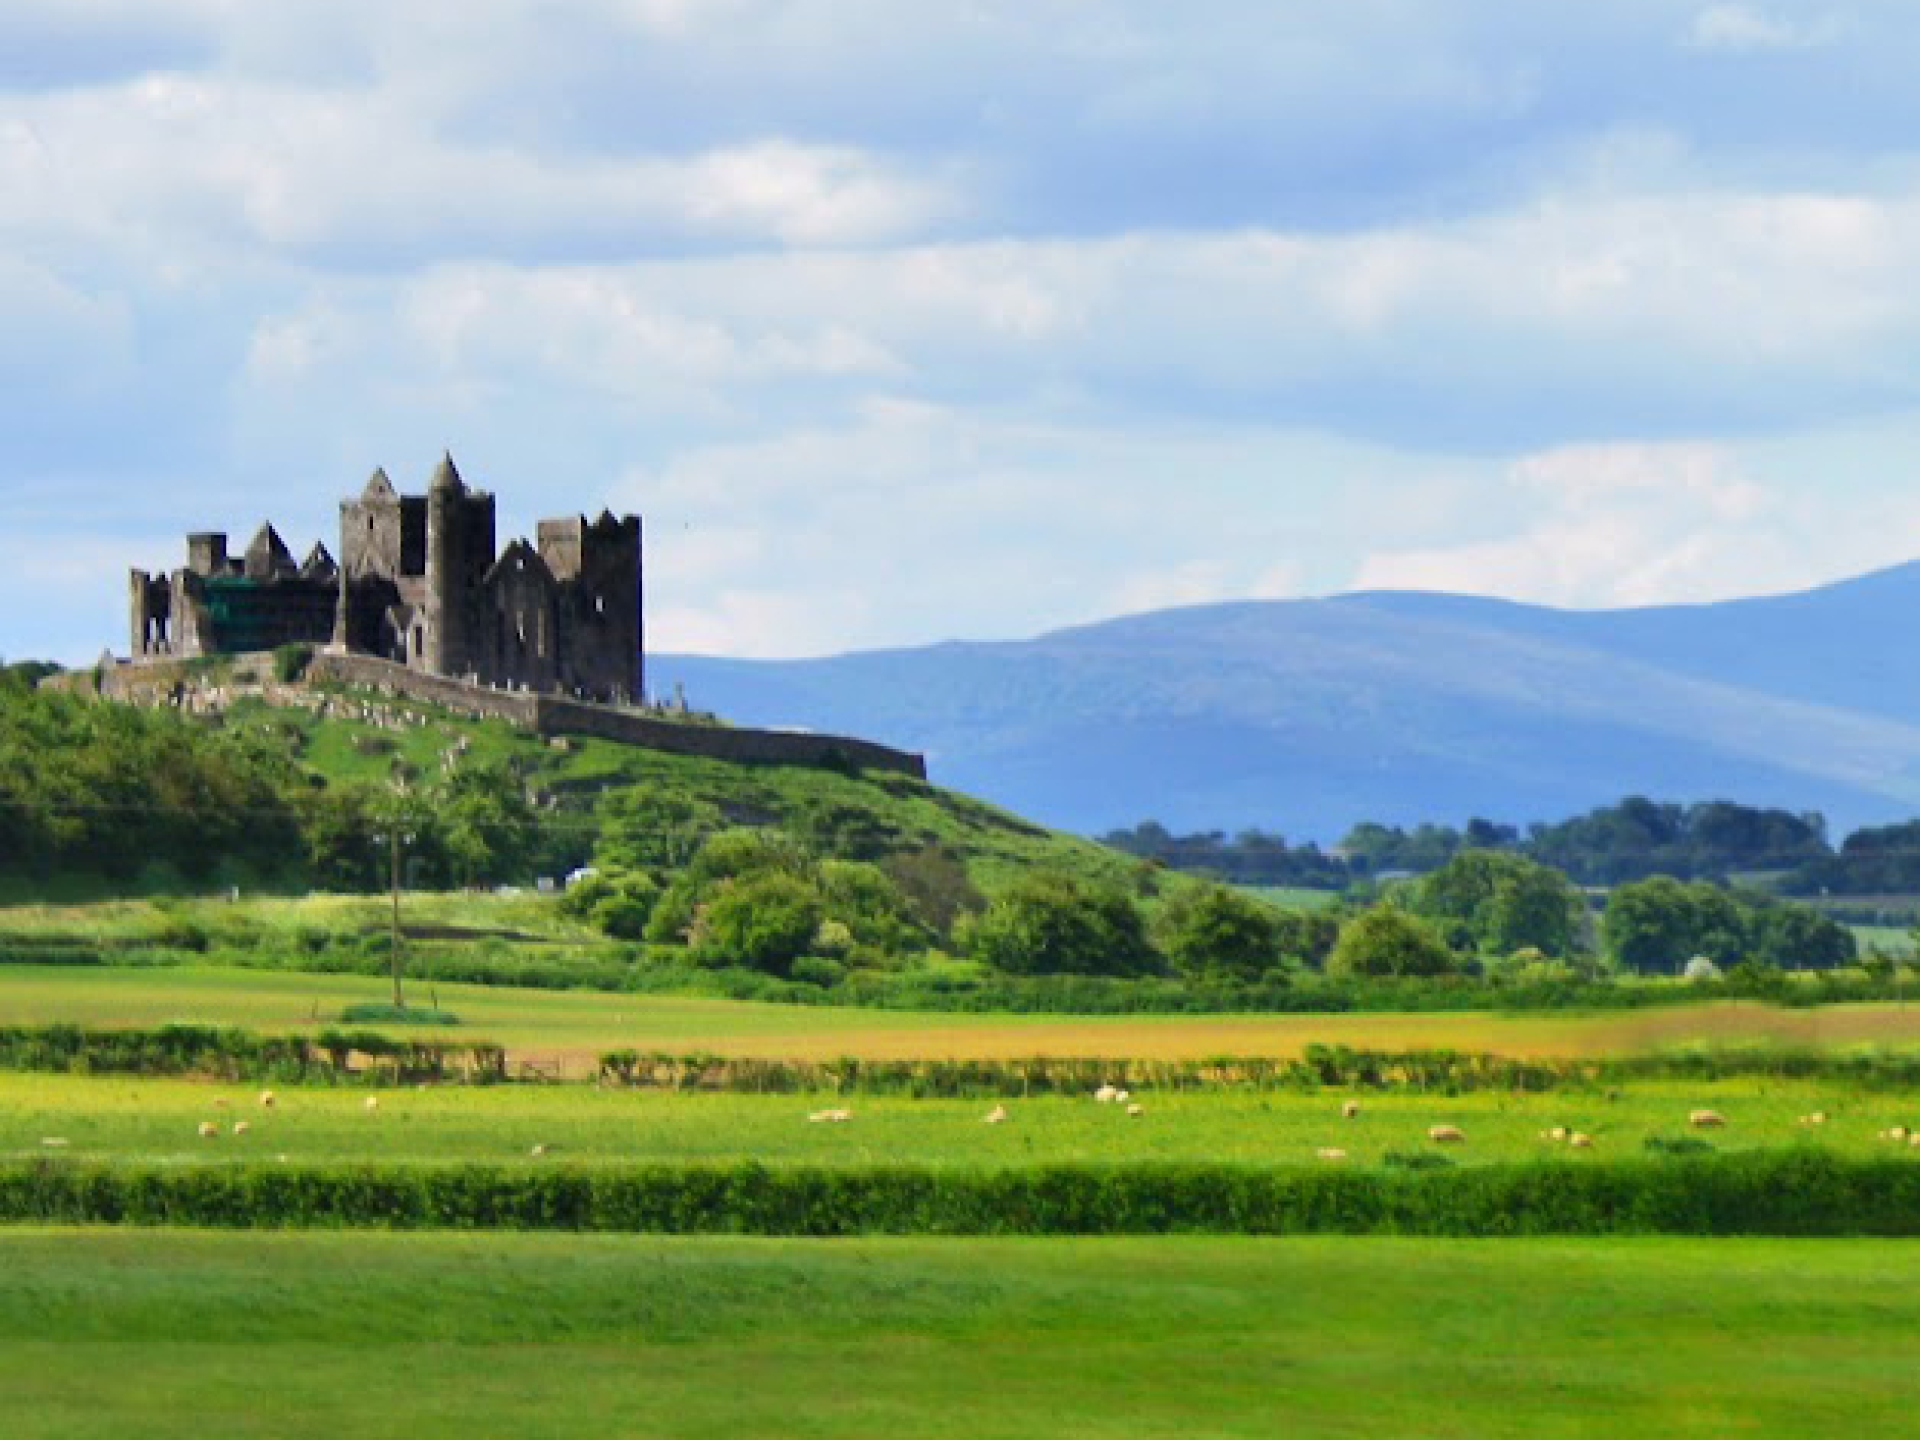 Tipperary's famous Rock of Cashel is seen surrounded by green fields and mountains in the distance.